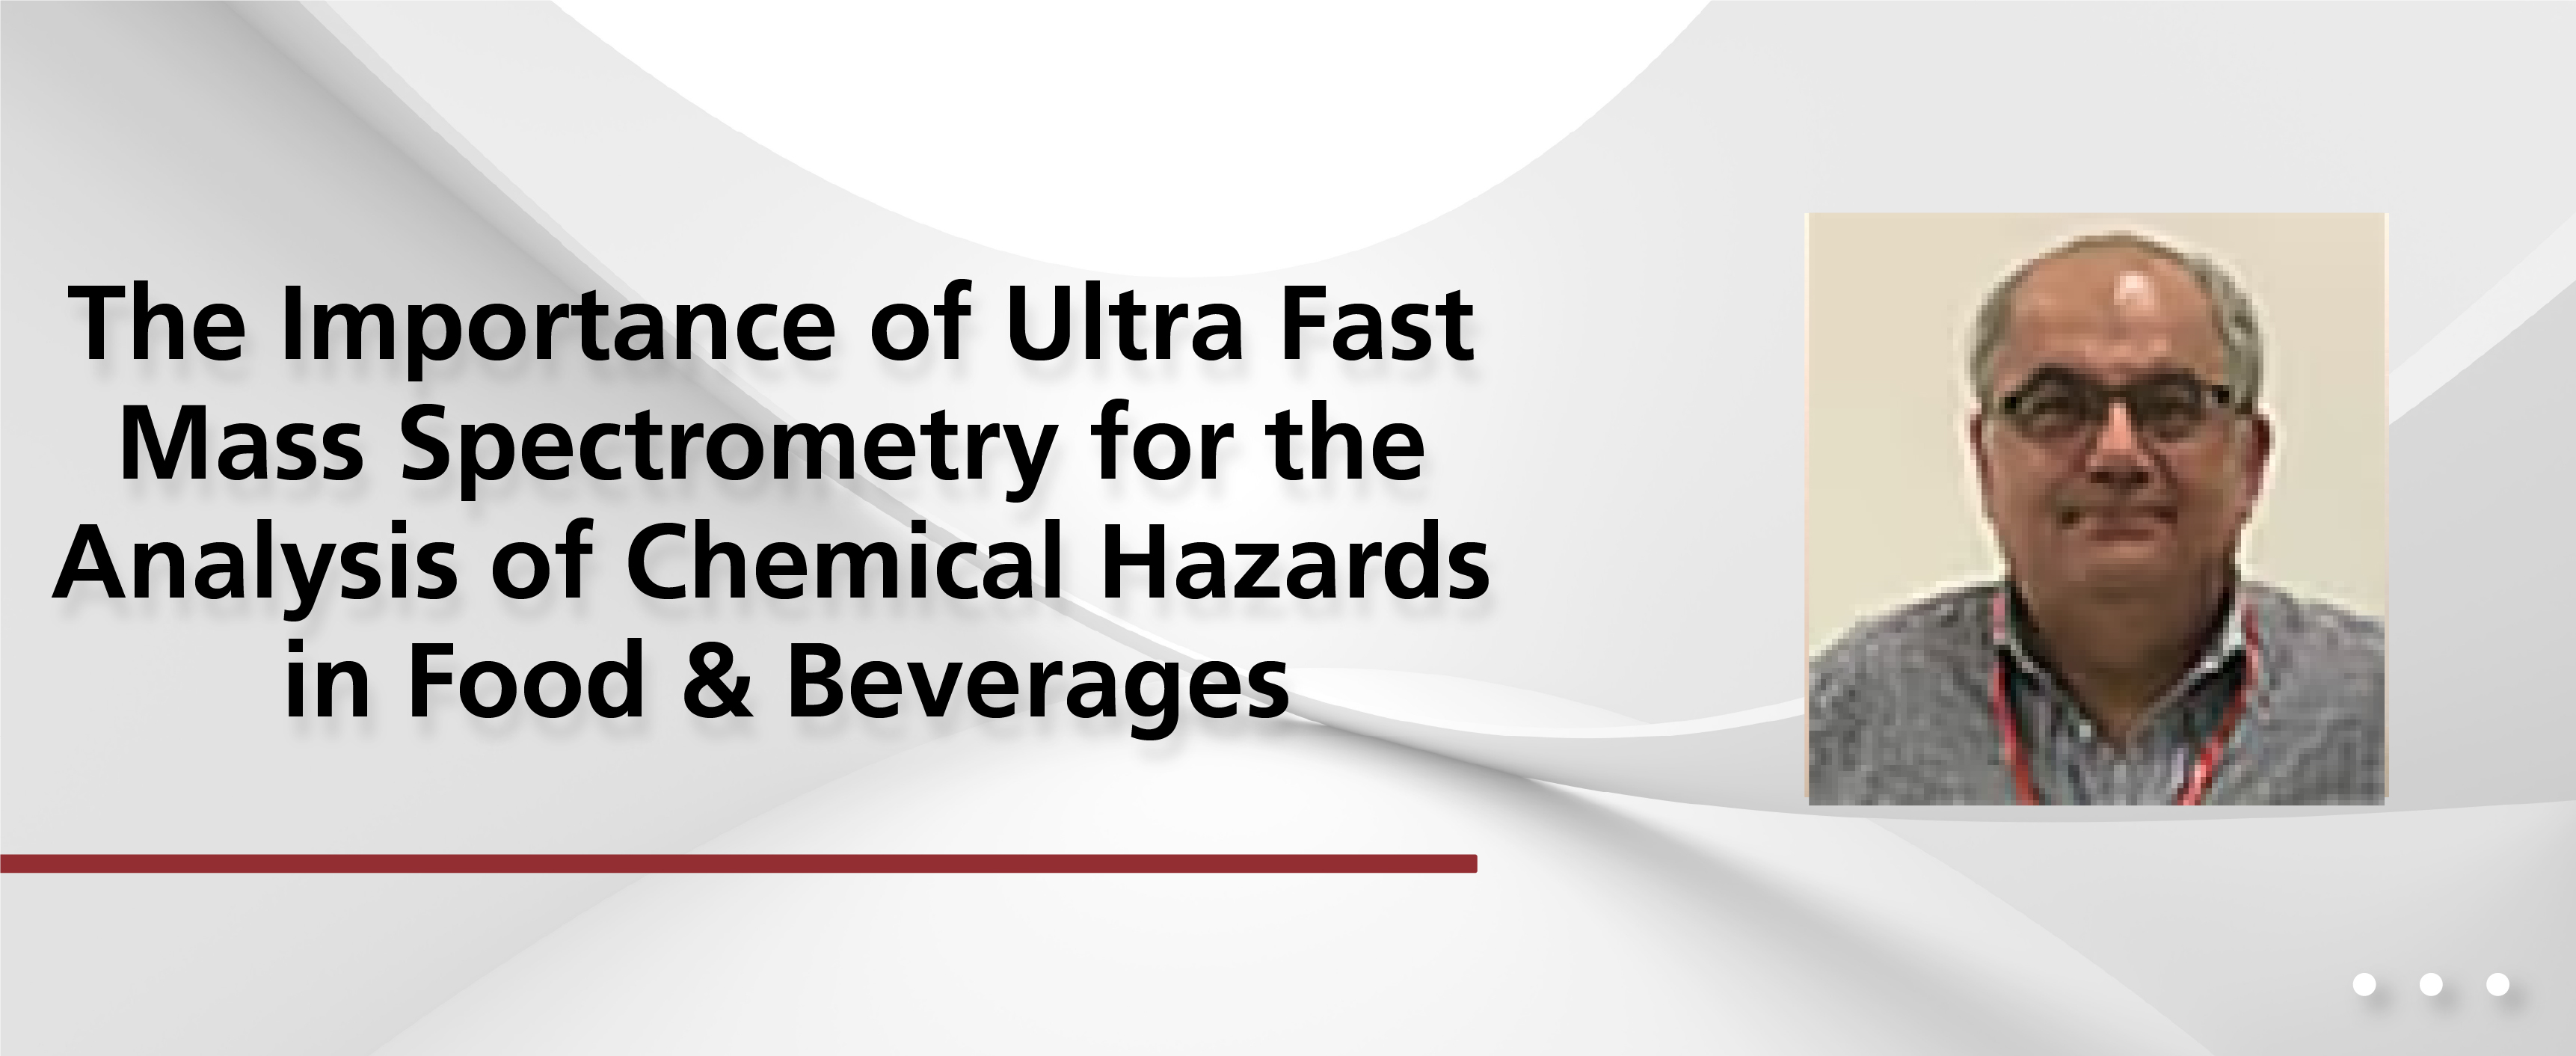 The Importance of Ultra Fast Mass Spectrometry for the Analysis of Chemical Hazards in Food and Beverages